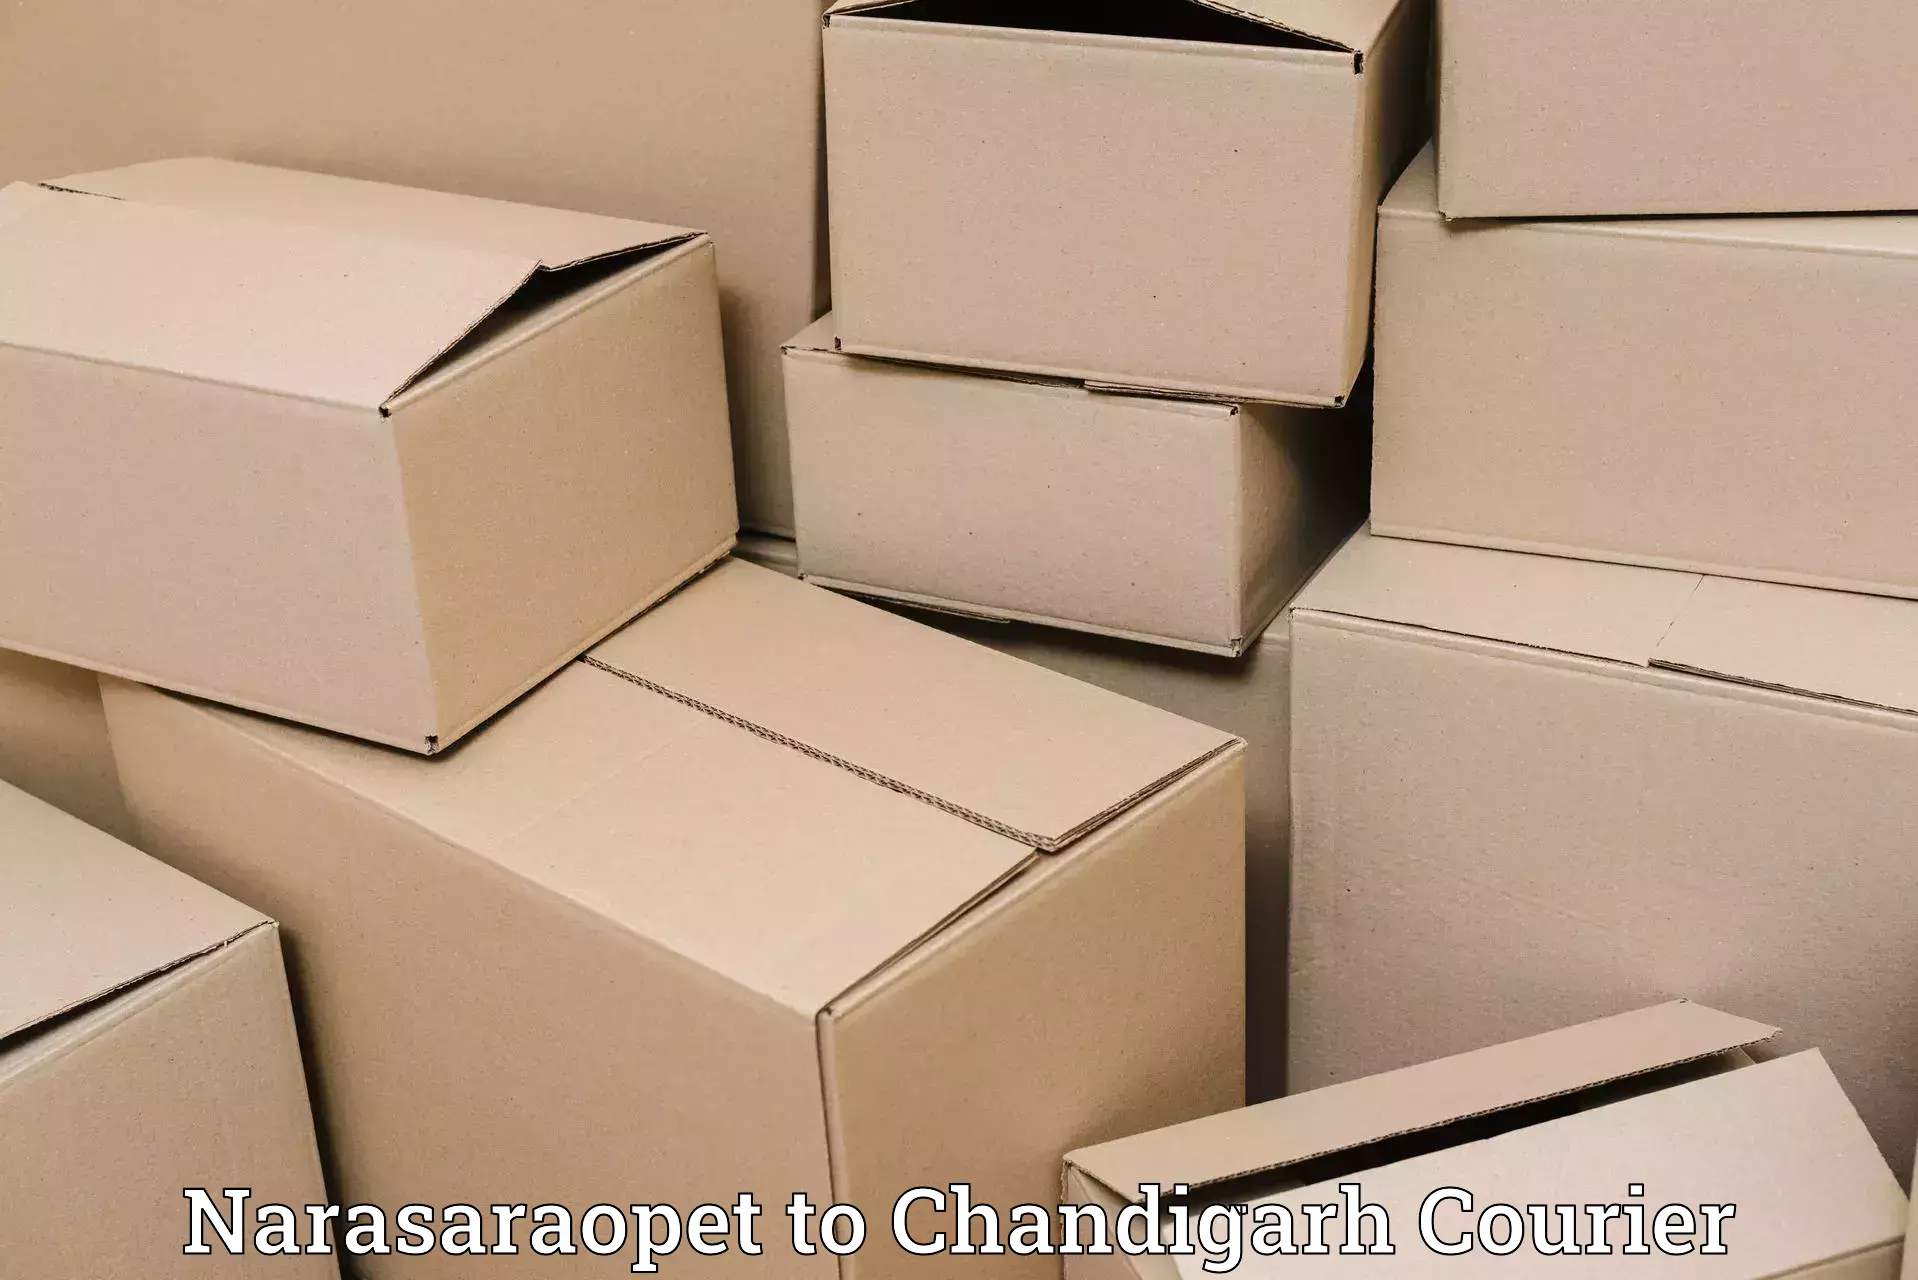 24-hour courier service Narasaraopet to Chandigarh